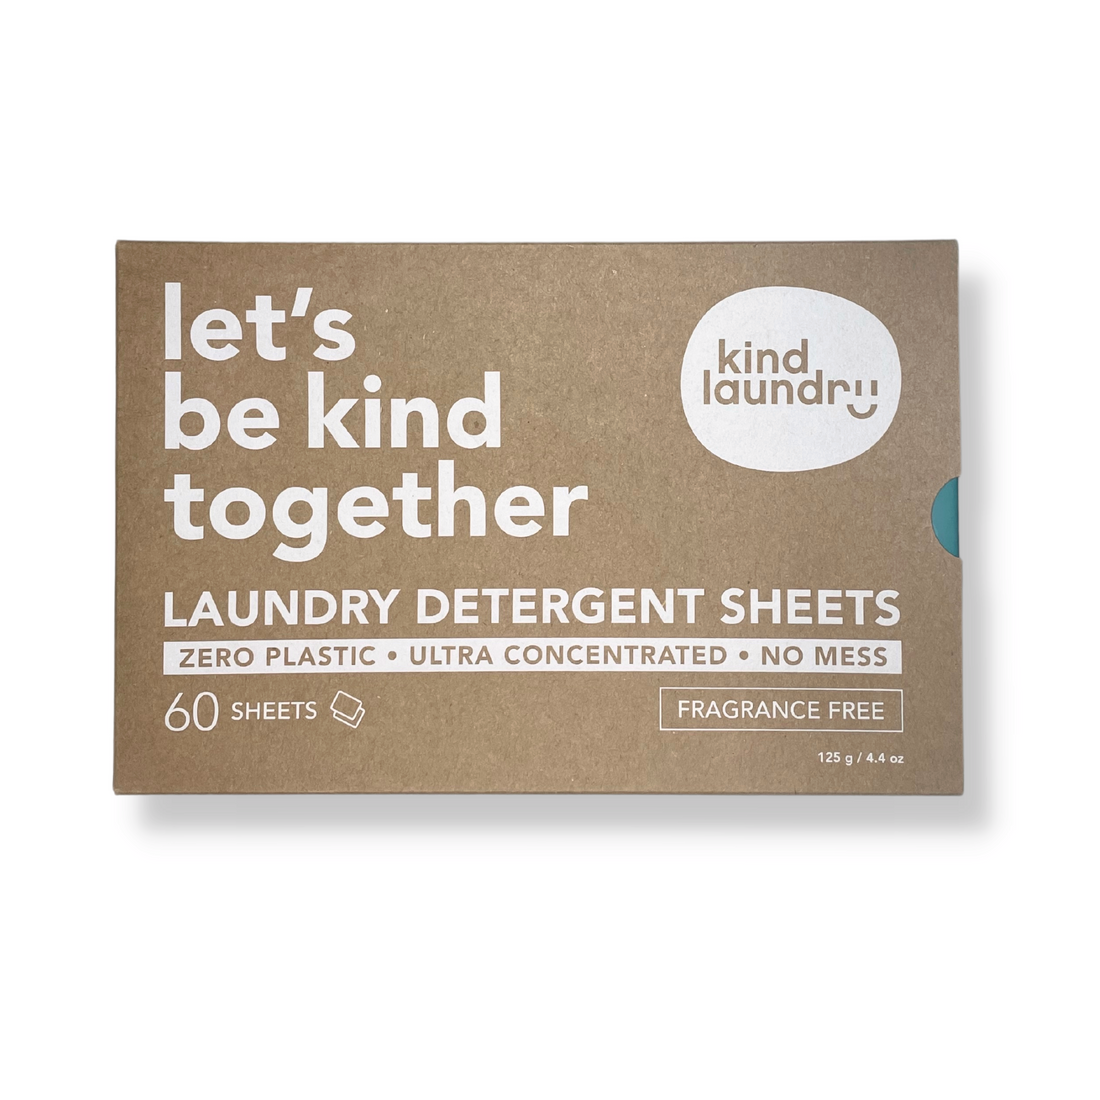 Kind Laundry Eco Friendly Detergent Sheets (Fragrance Free) In Zero Waste Packaging On White Background.